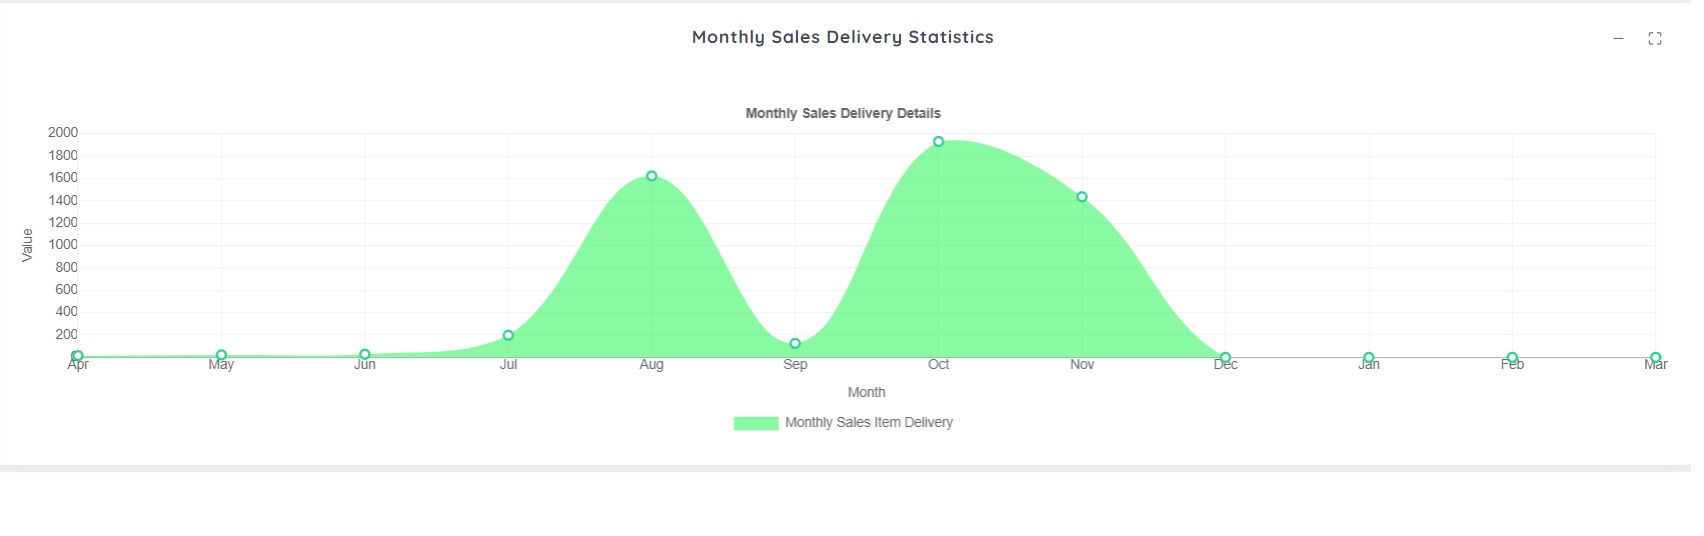 Sales Delivery Trend